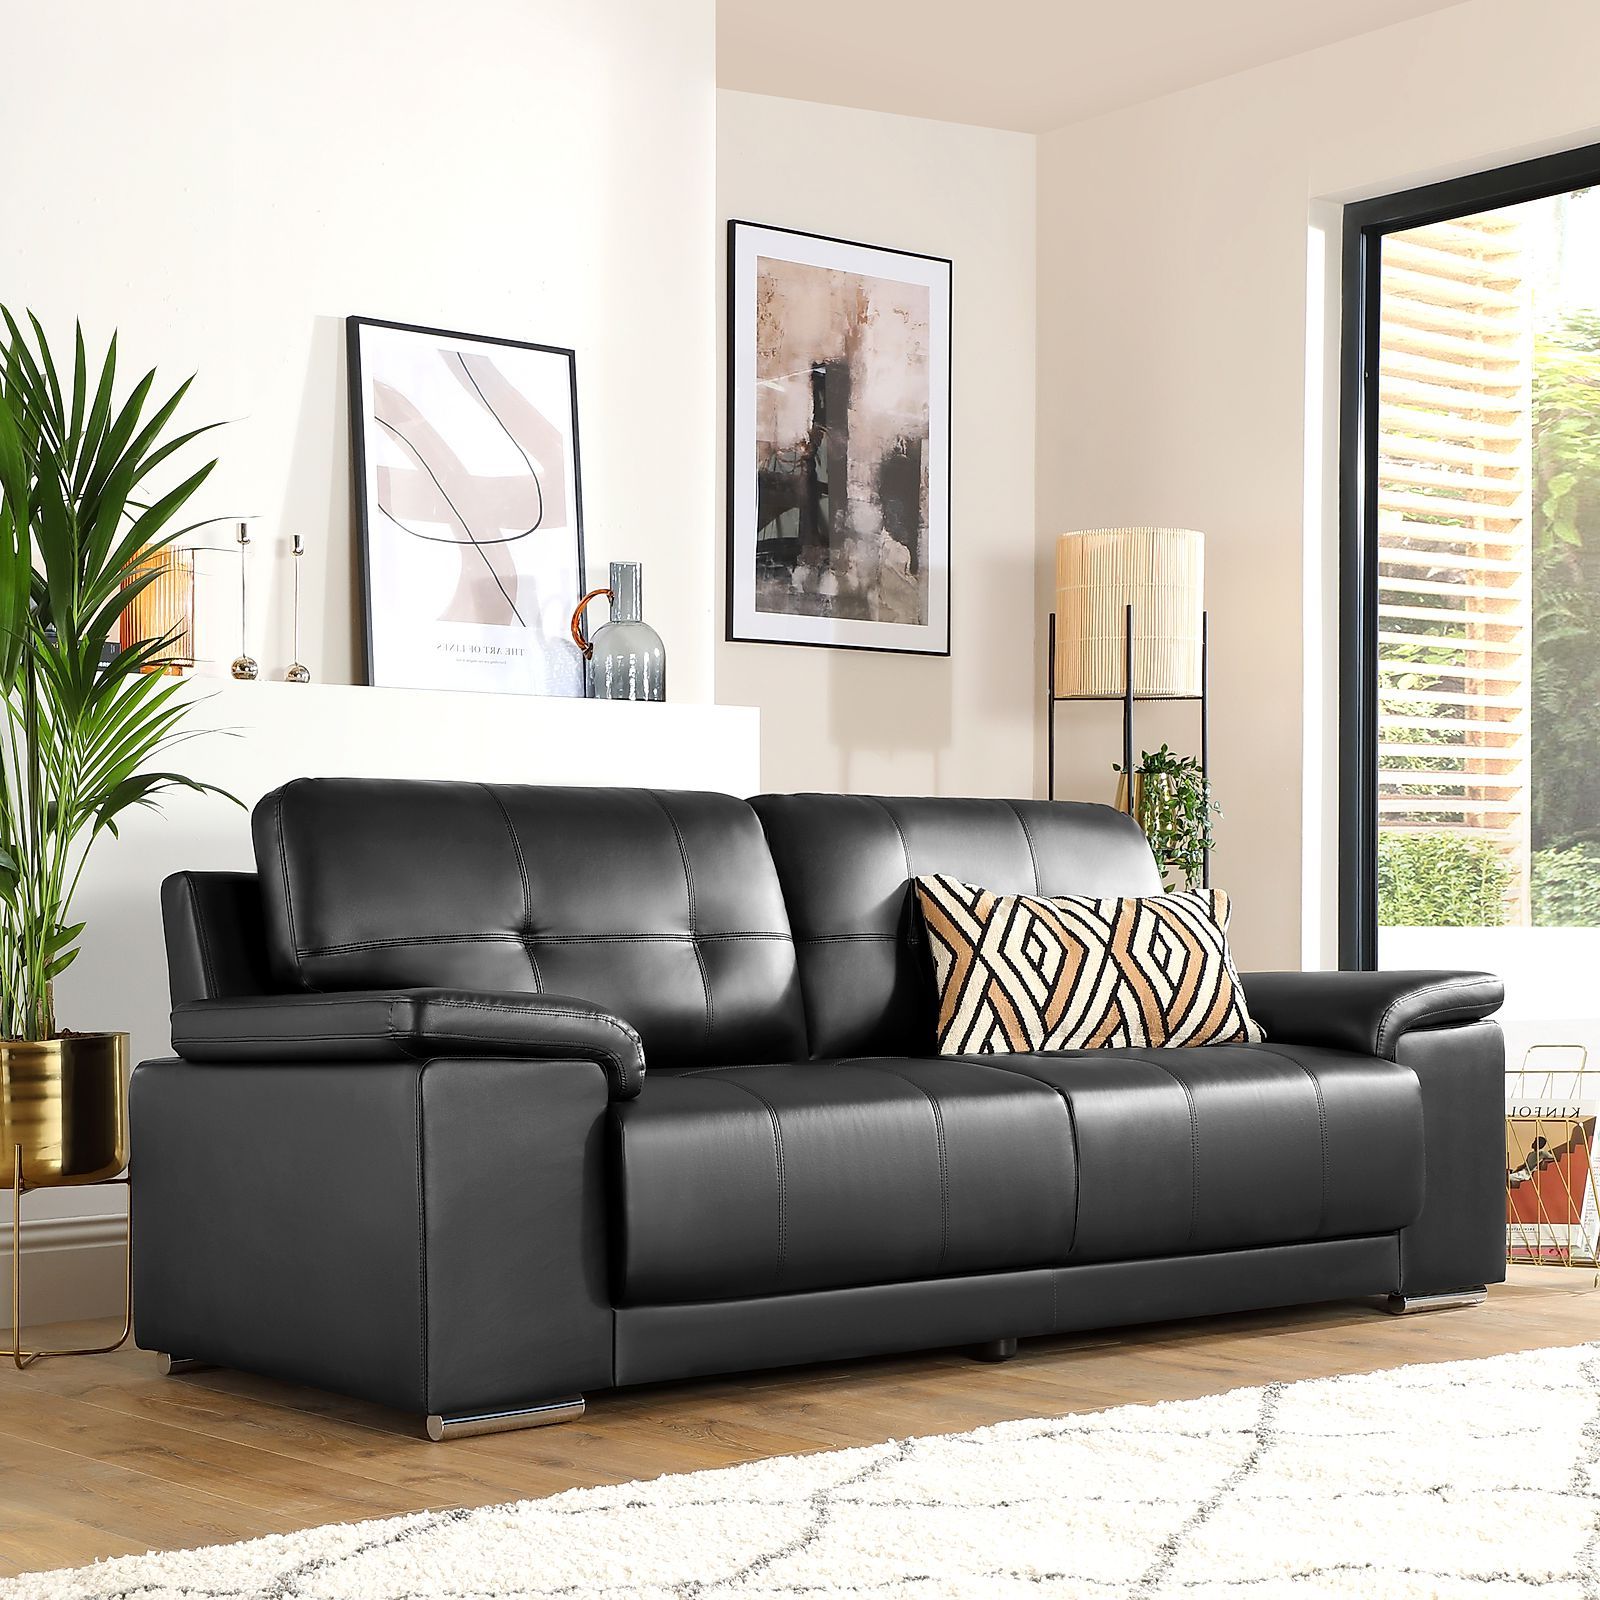 Kansas Black Leather 3 Seater Sofa | Furniture Choice Within 3 Seat L Shaped Sofas In Black (View 8 of 20)